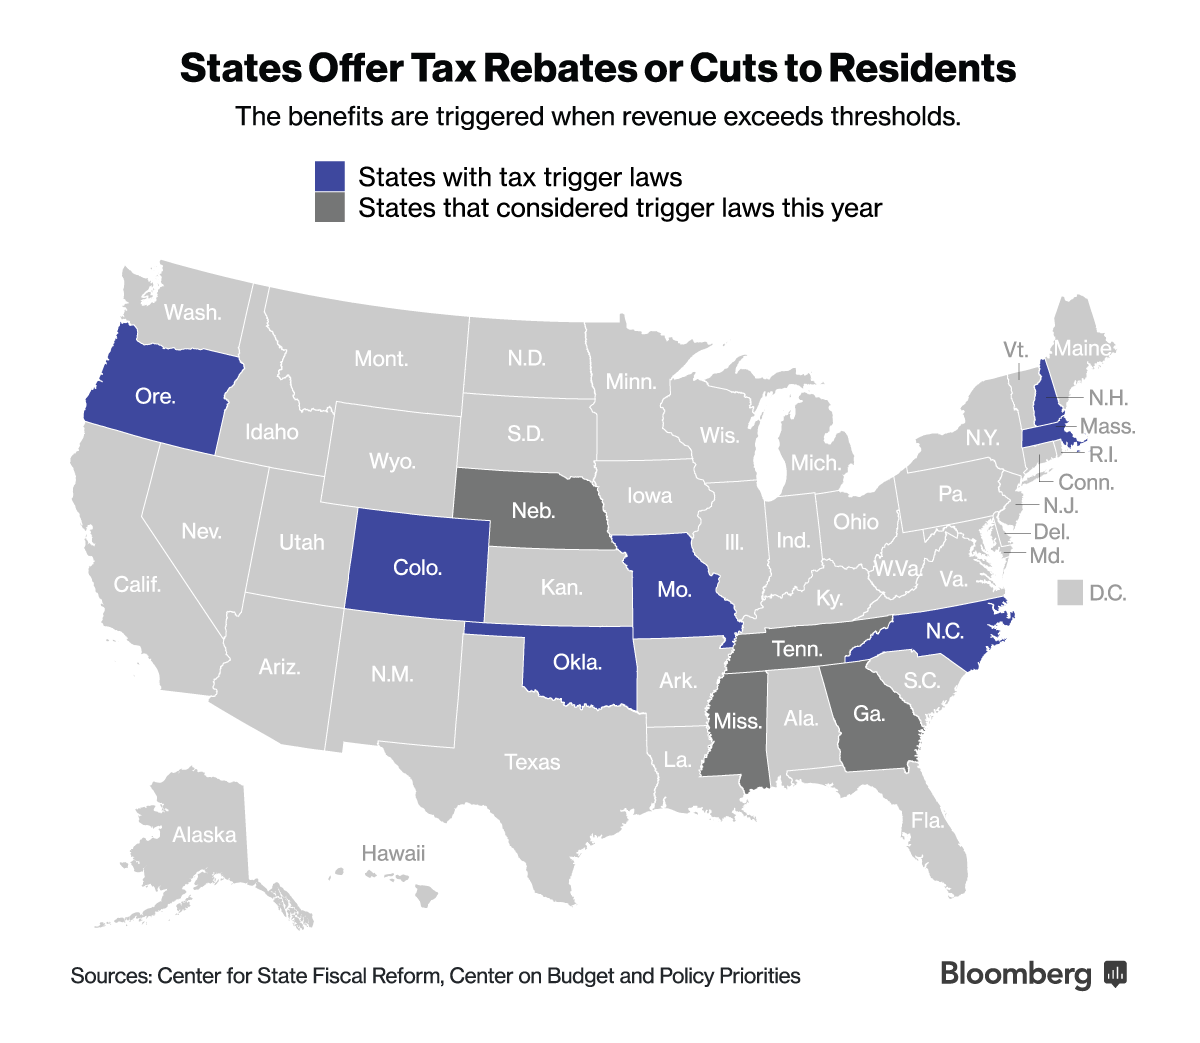 Wealthy Reap the Most as Revenue Rush Triggers U.S. State Rebates ...